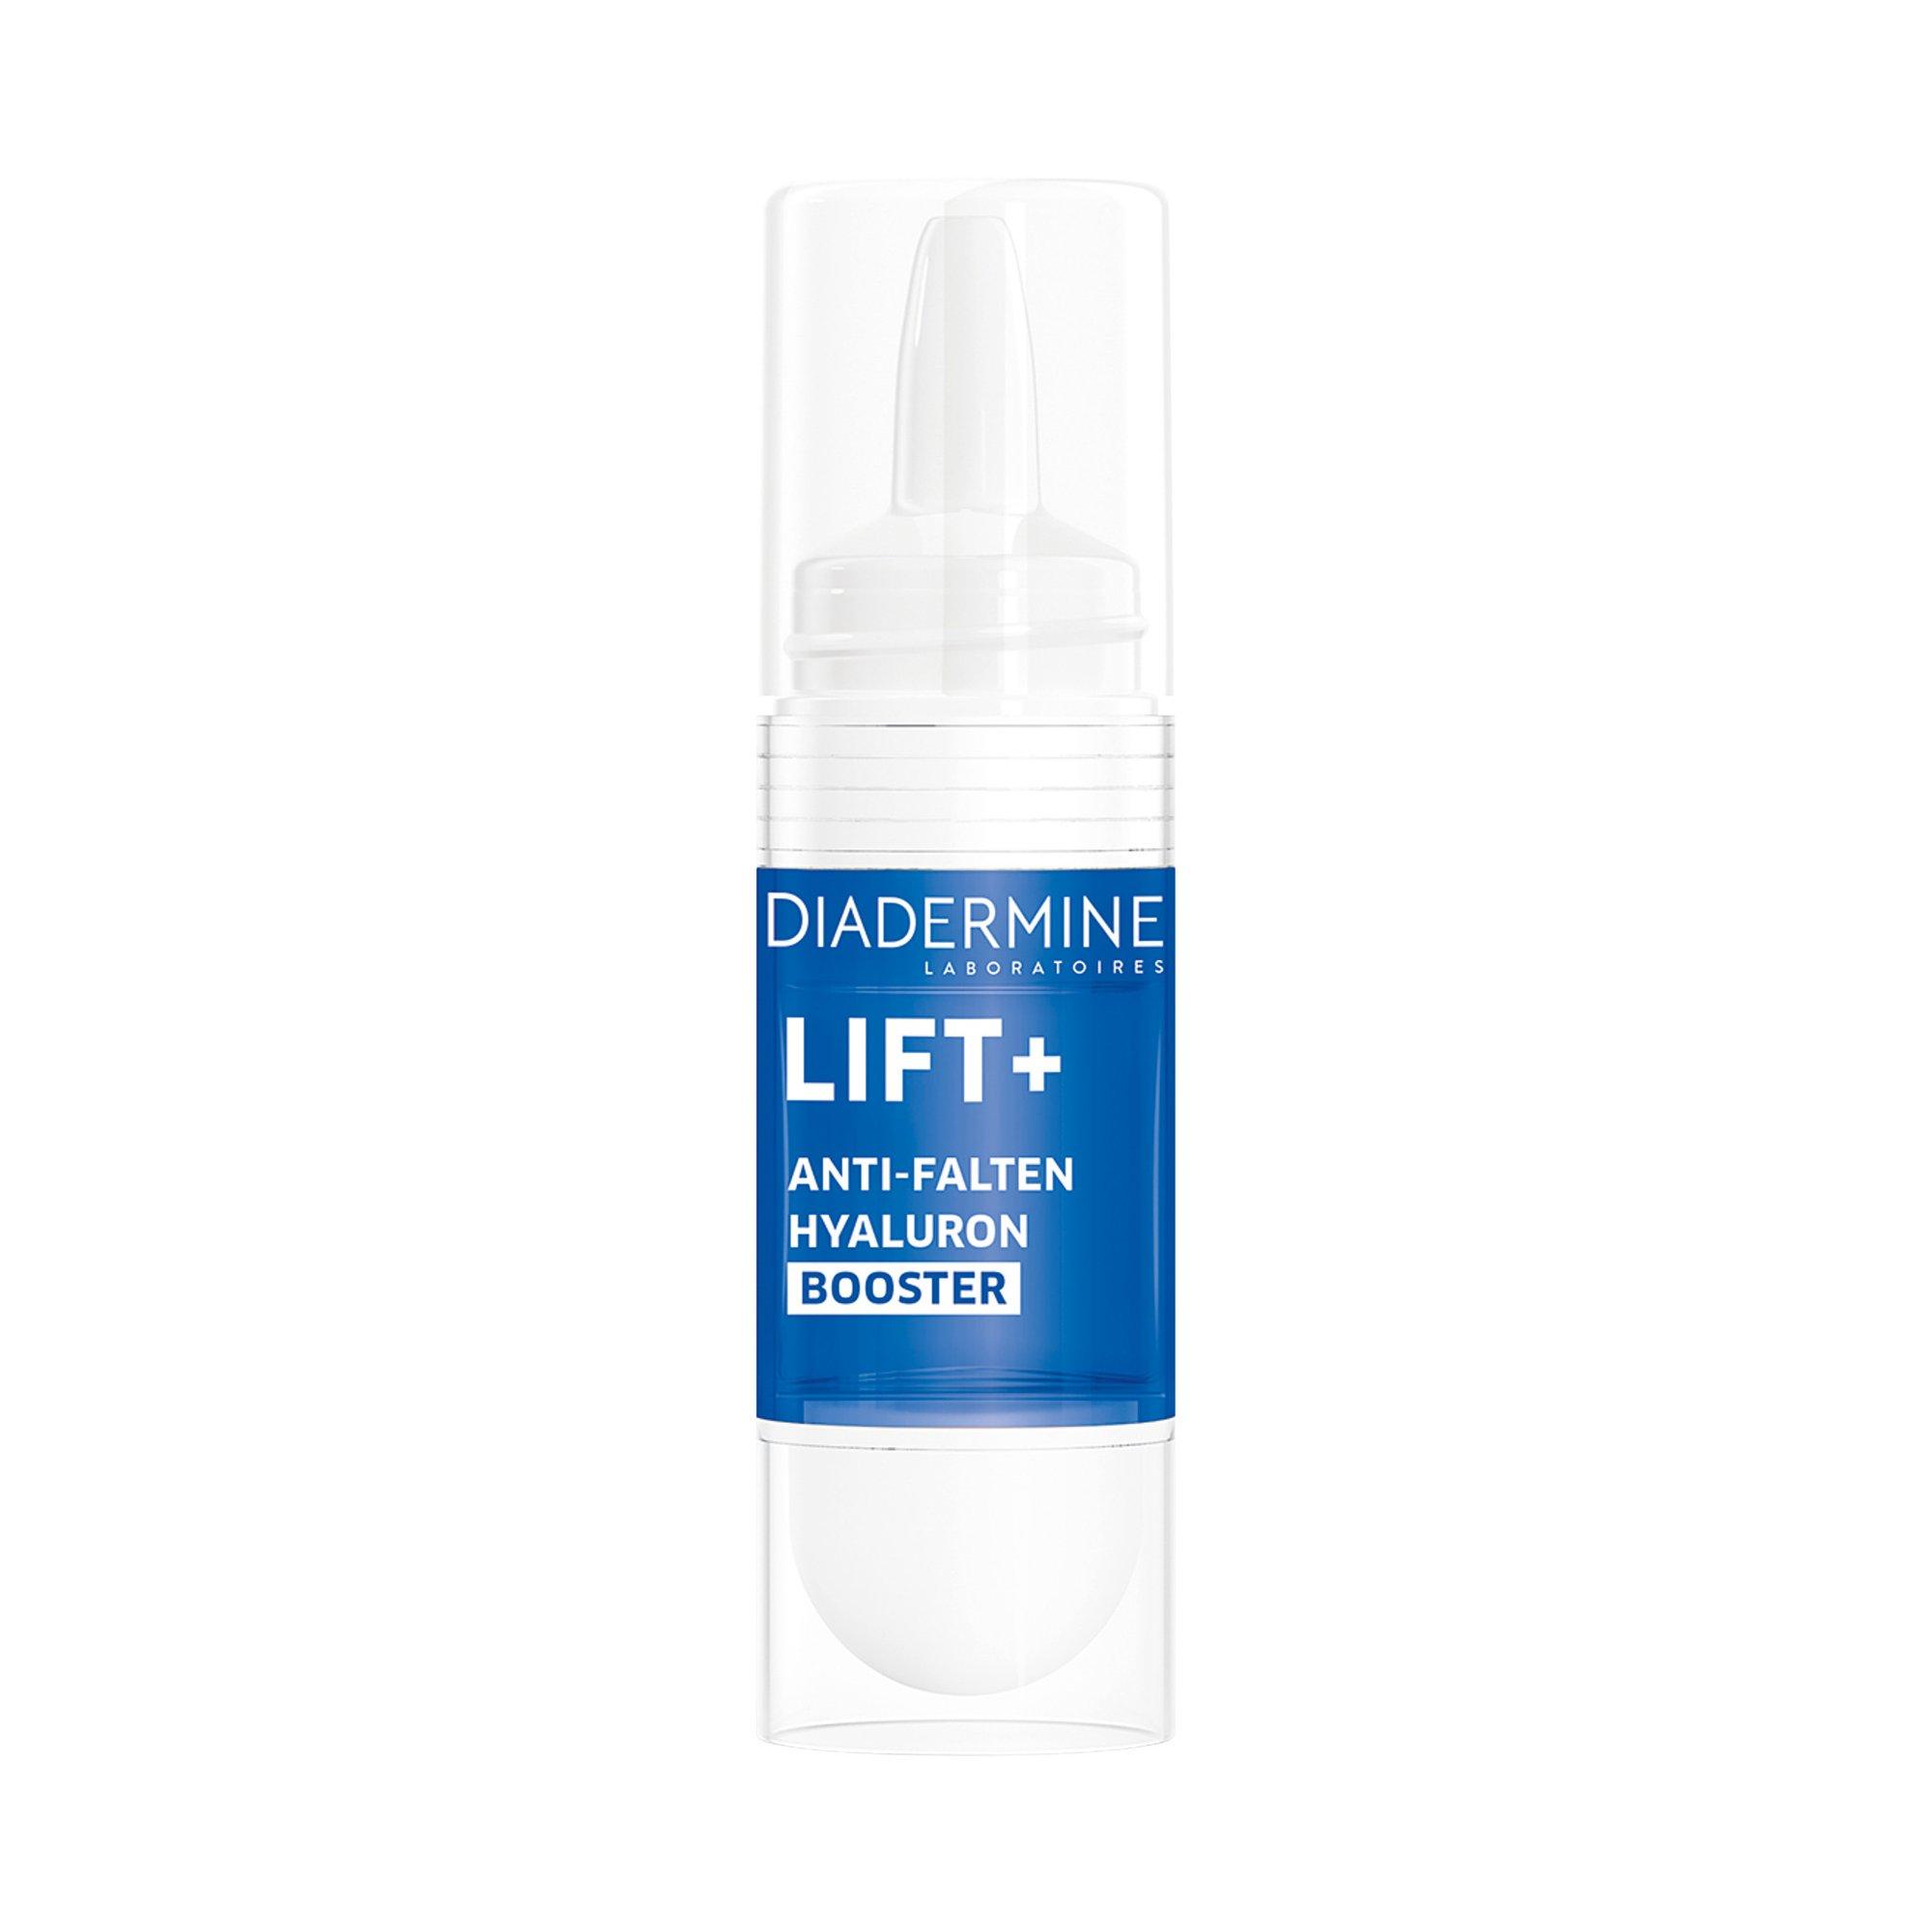 Image of DIADERMINE Lift + Hyaluron Booster Anti-Falten Hyaluron Booster - 15ml